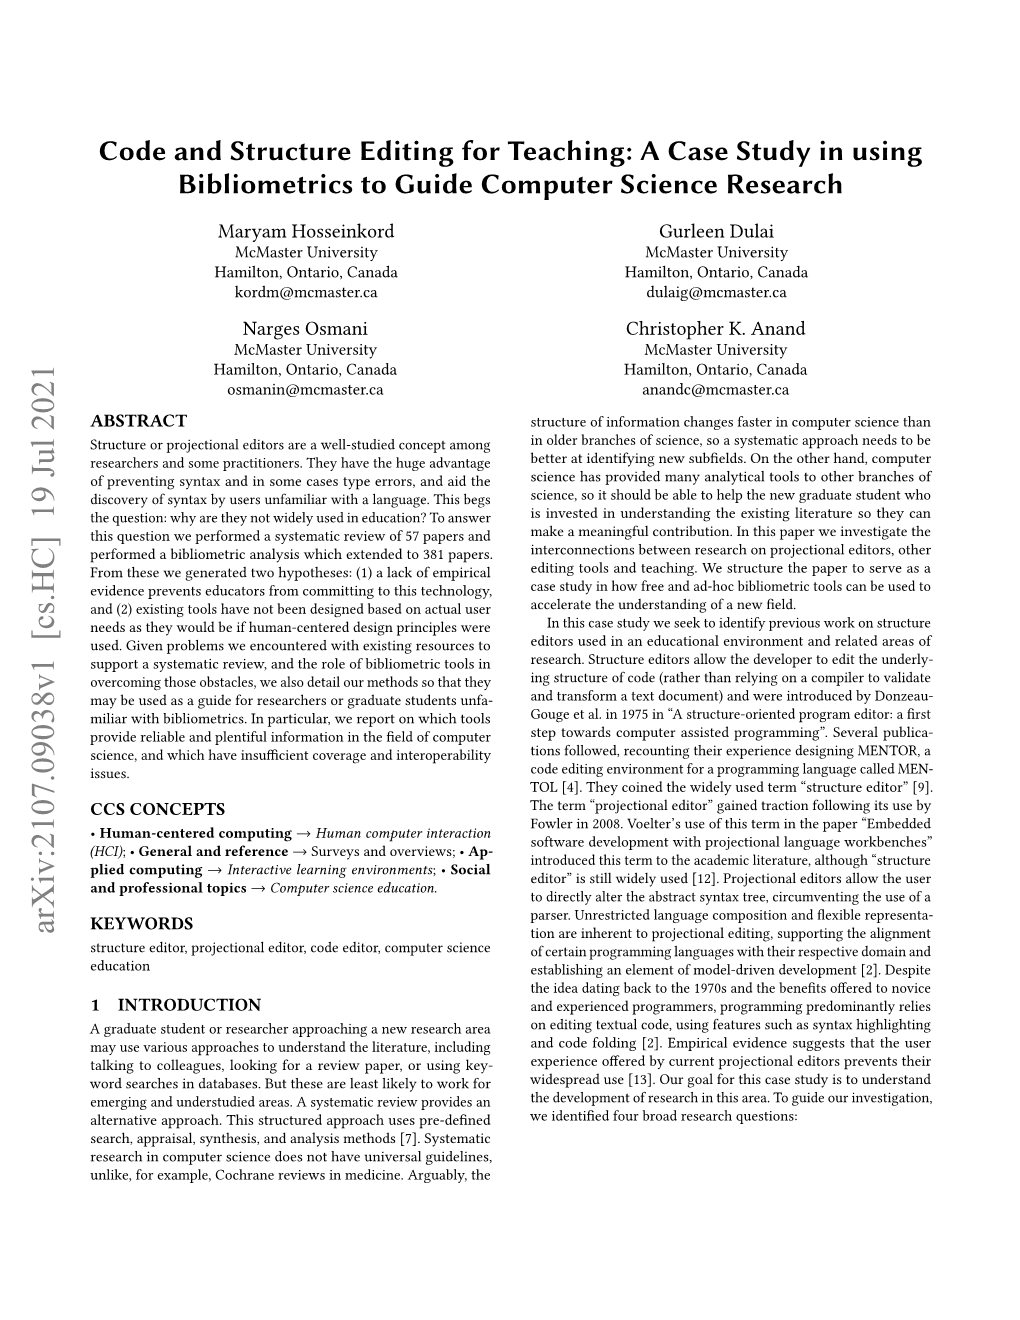 A Case Study in Using Bibliometrics to Guide Computer Science Research